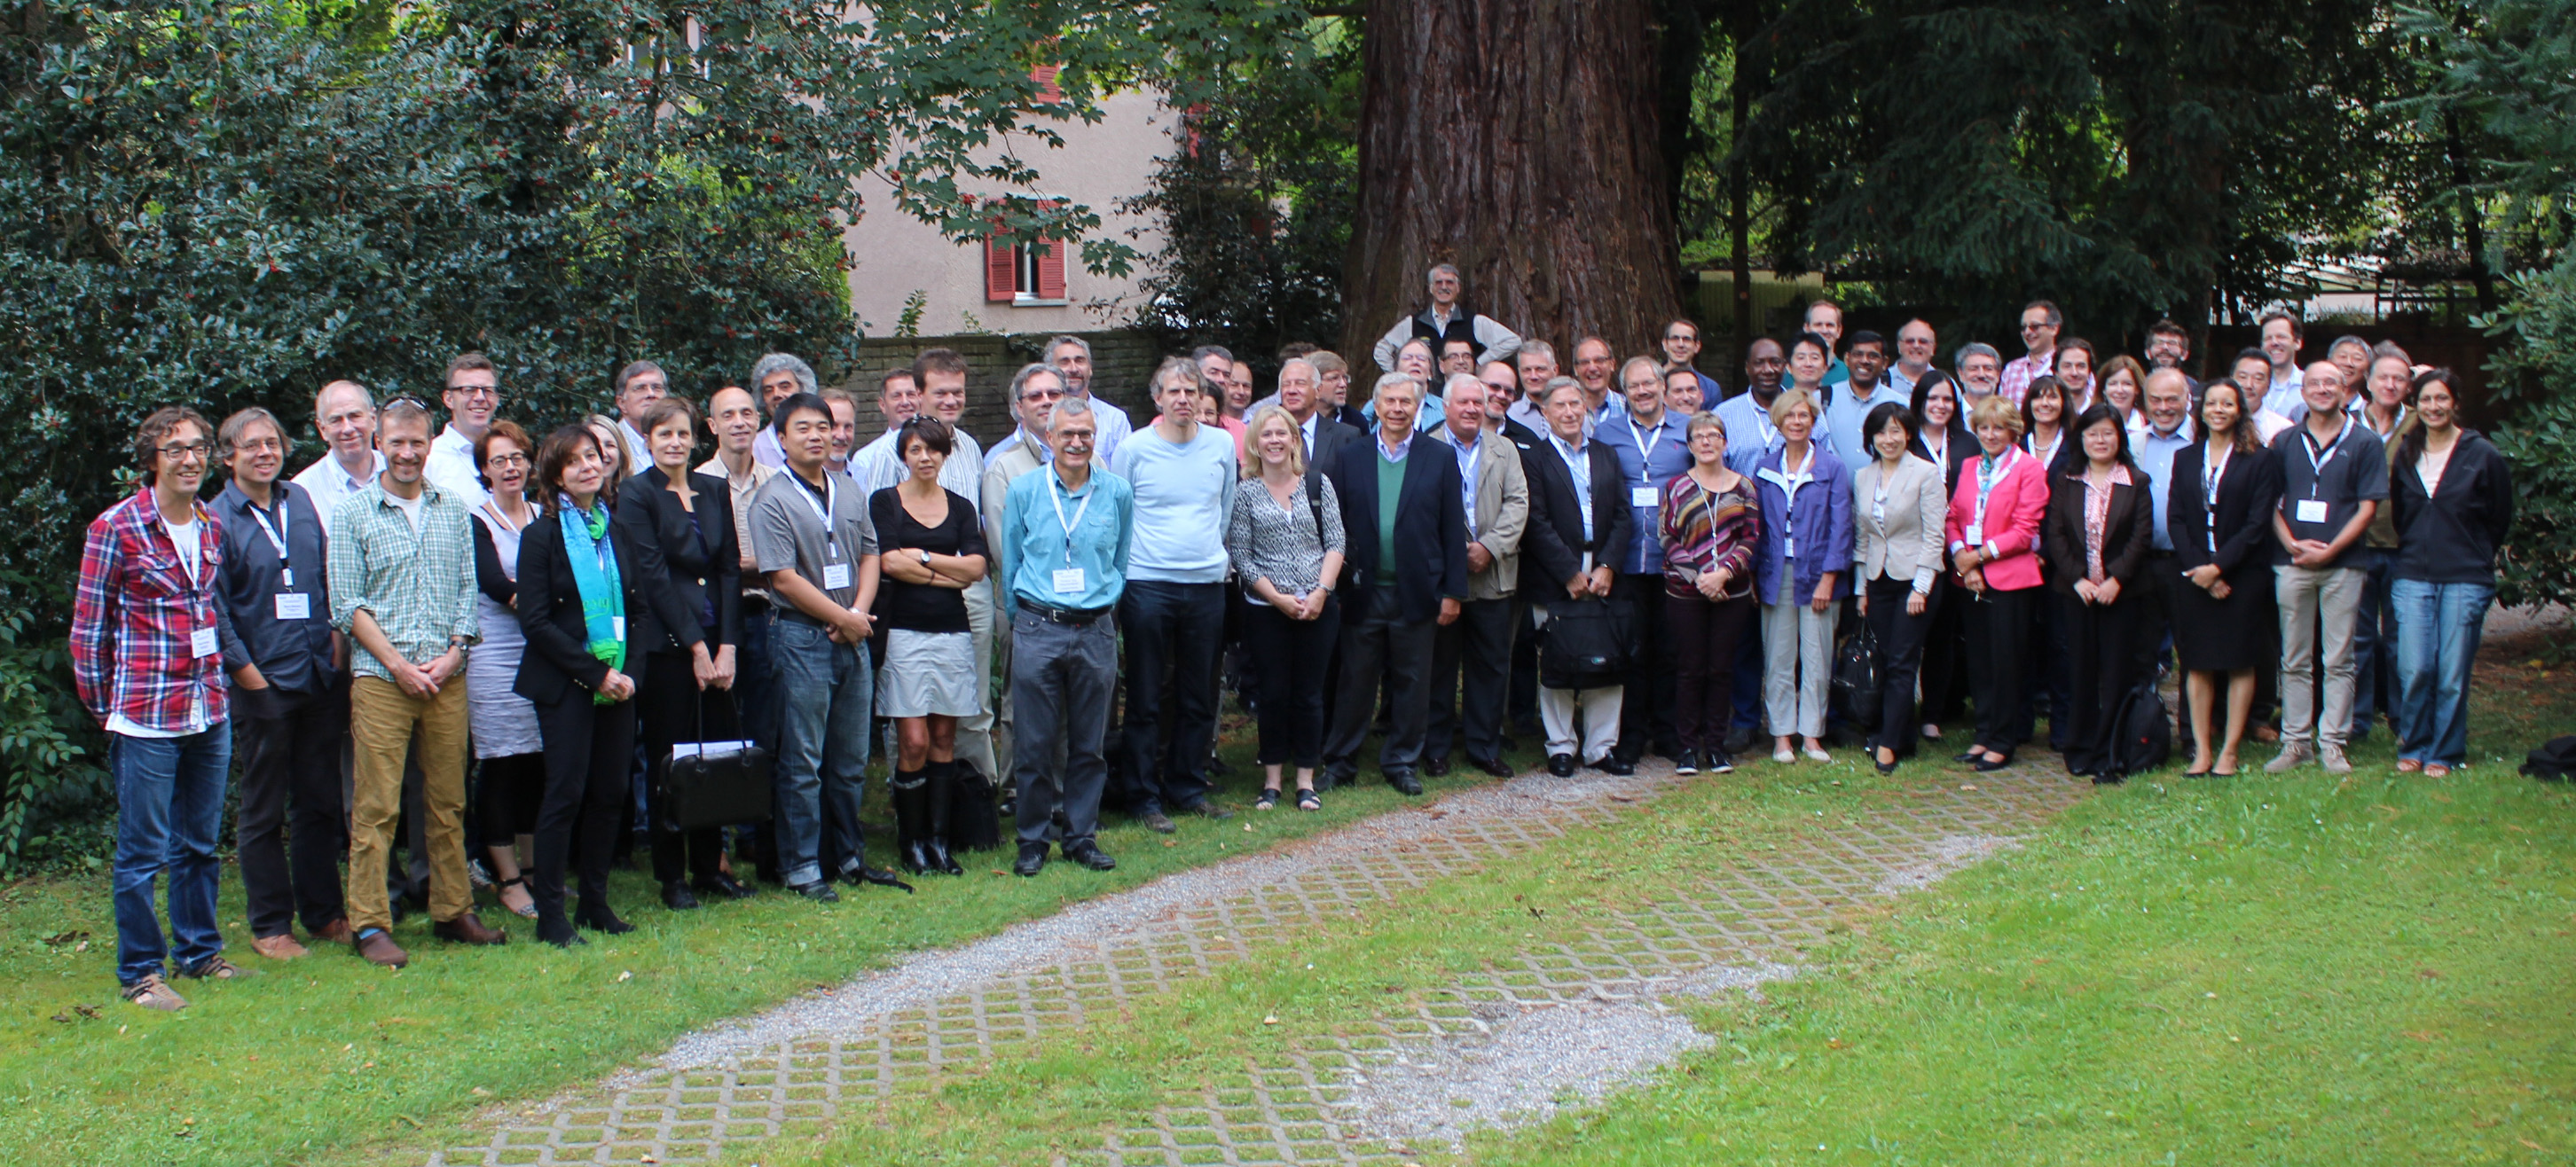 WS WCRP-IPCC Group Picture